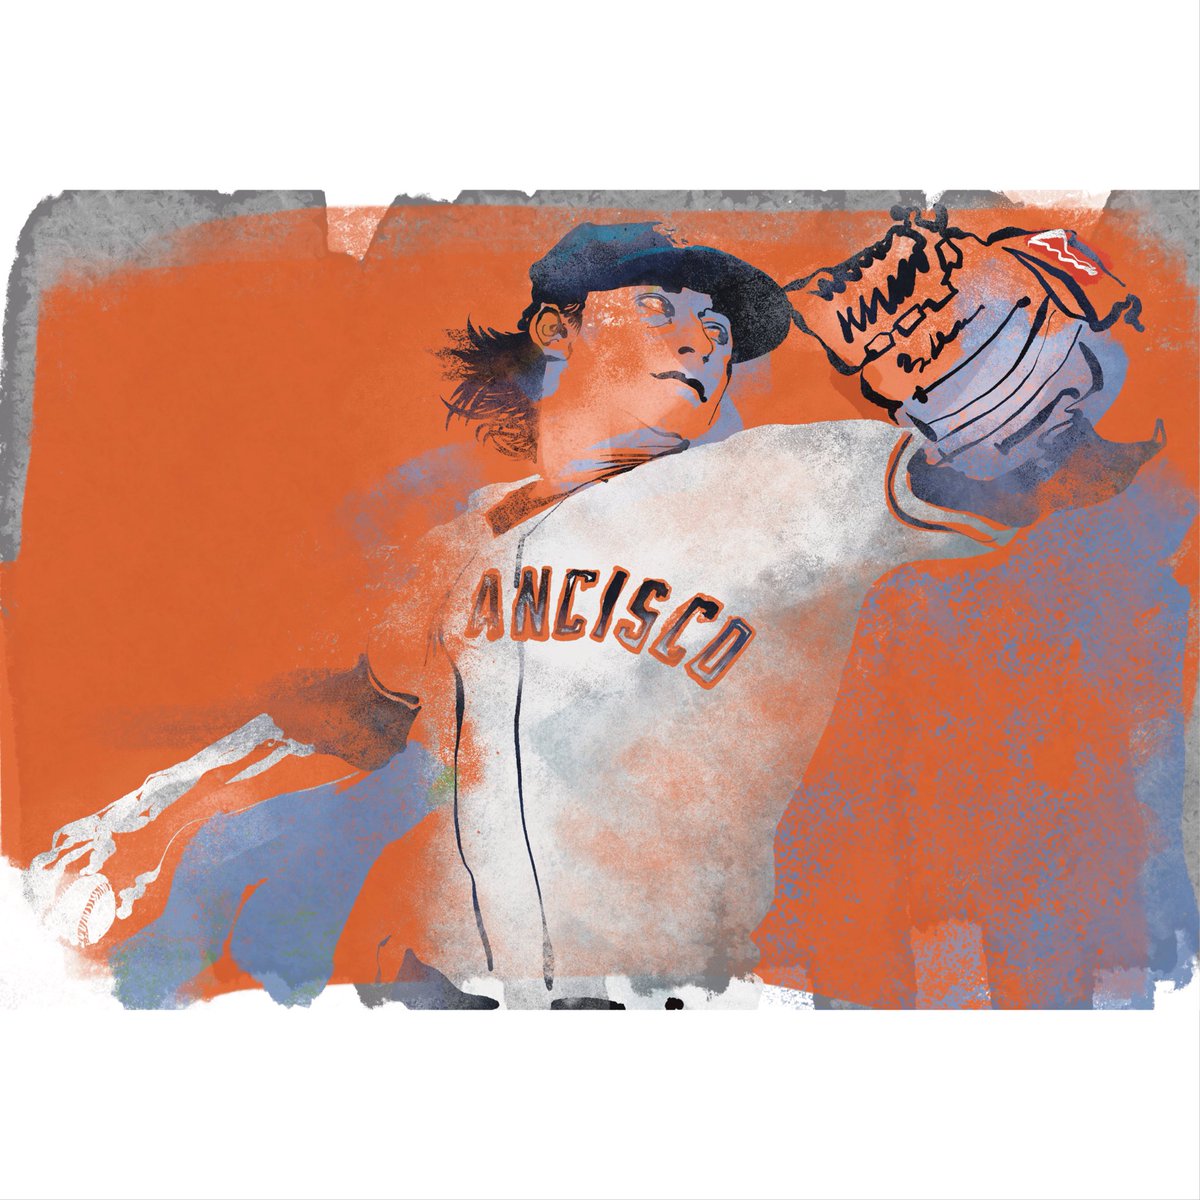 This Day in Baseball History: April 23, 2012 - The Giants sweep the Mets in a doubleheader at Citi Field, 6 - 1 and 7 - 2. Tim Lincecum picks up his first win of the season in the opener, while Madison Bumgarner is the winner in the second contest. #tripleplaydesign #timlincecum